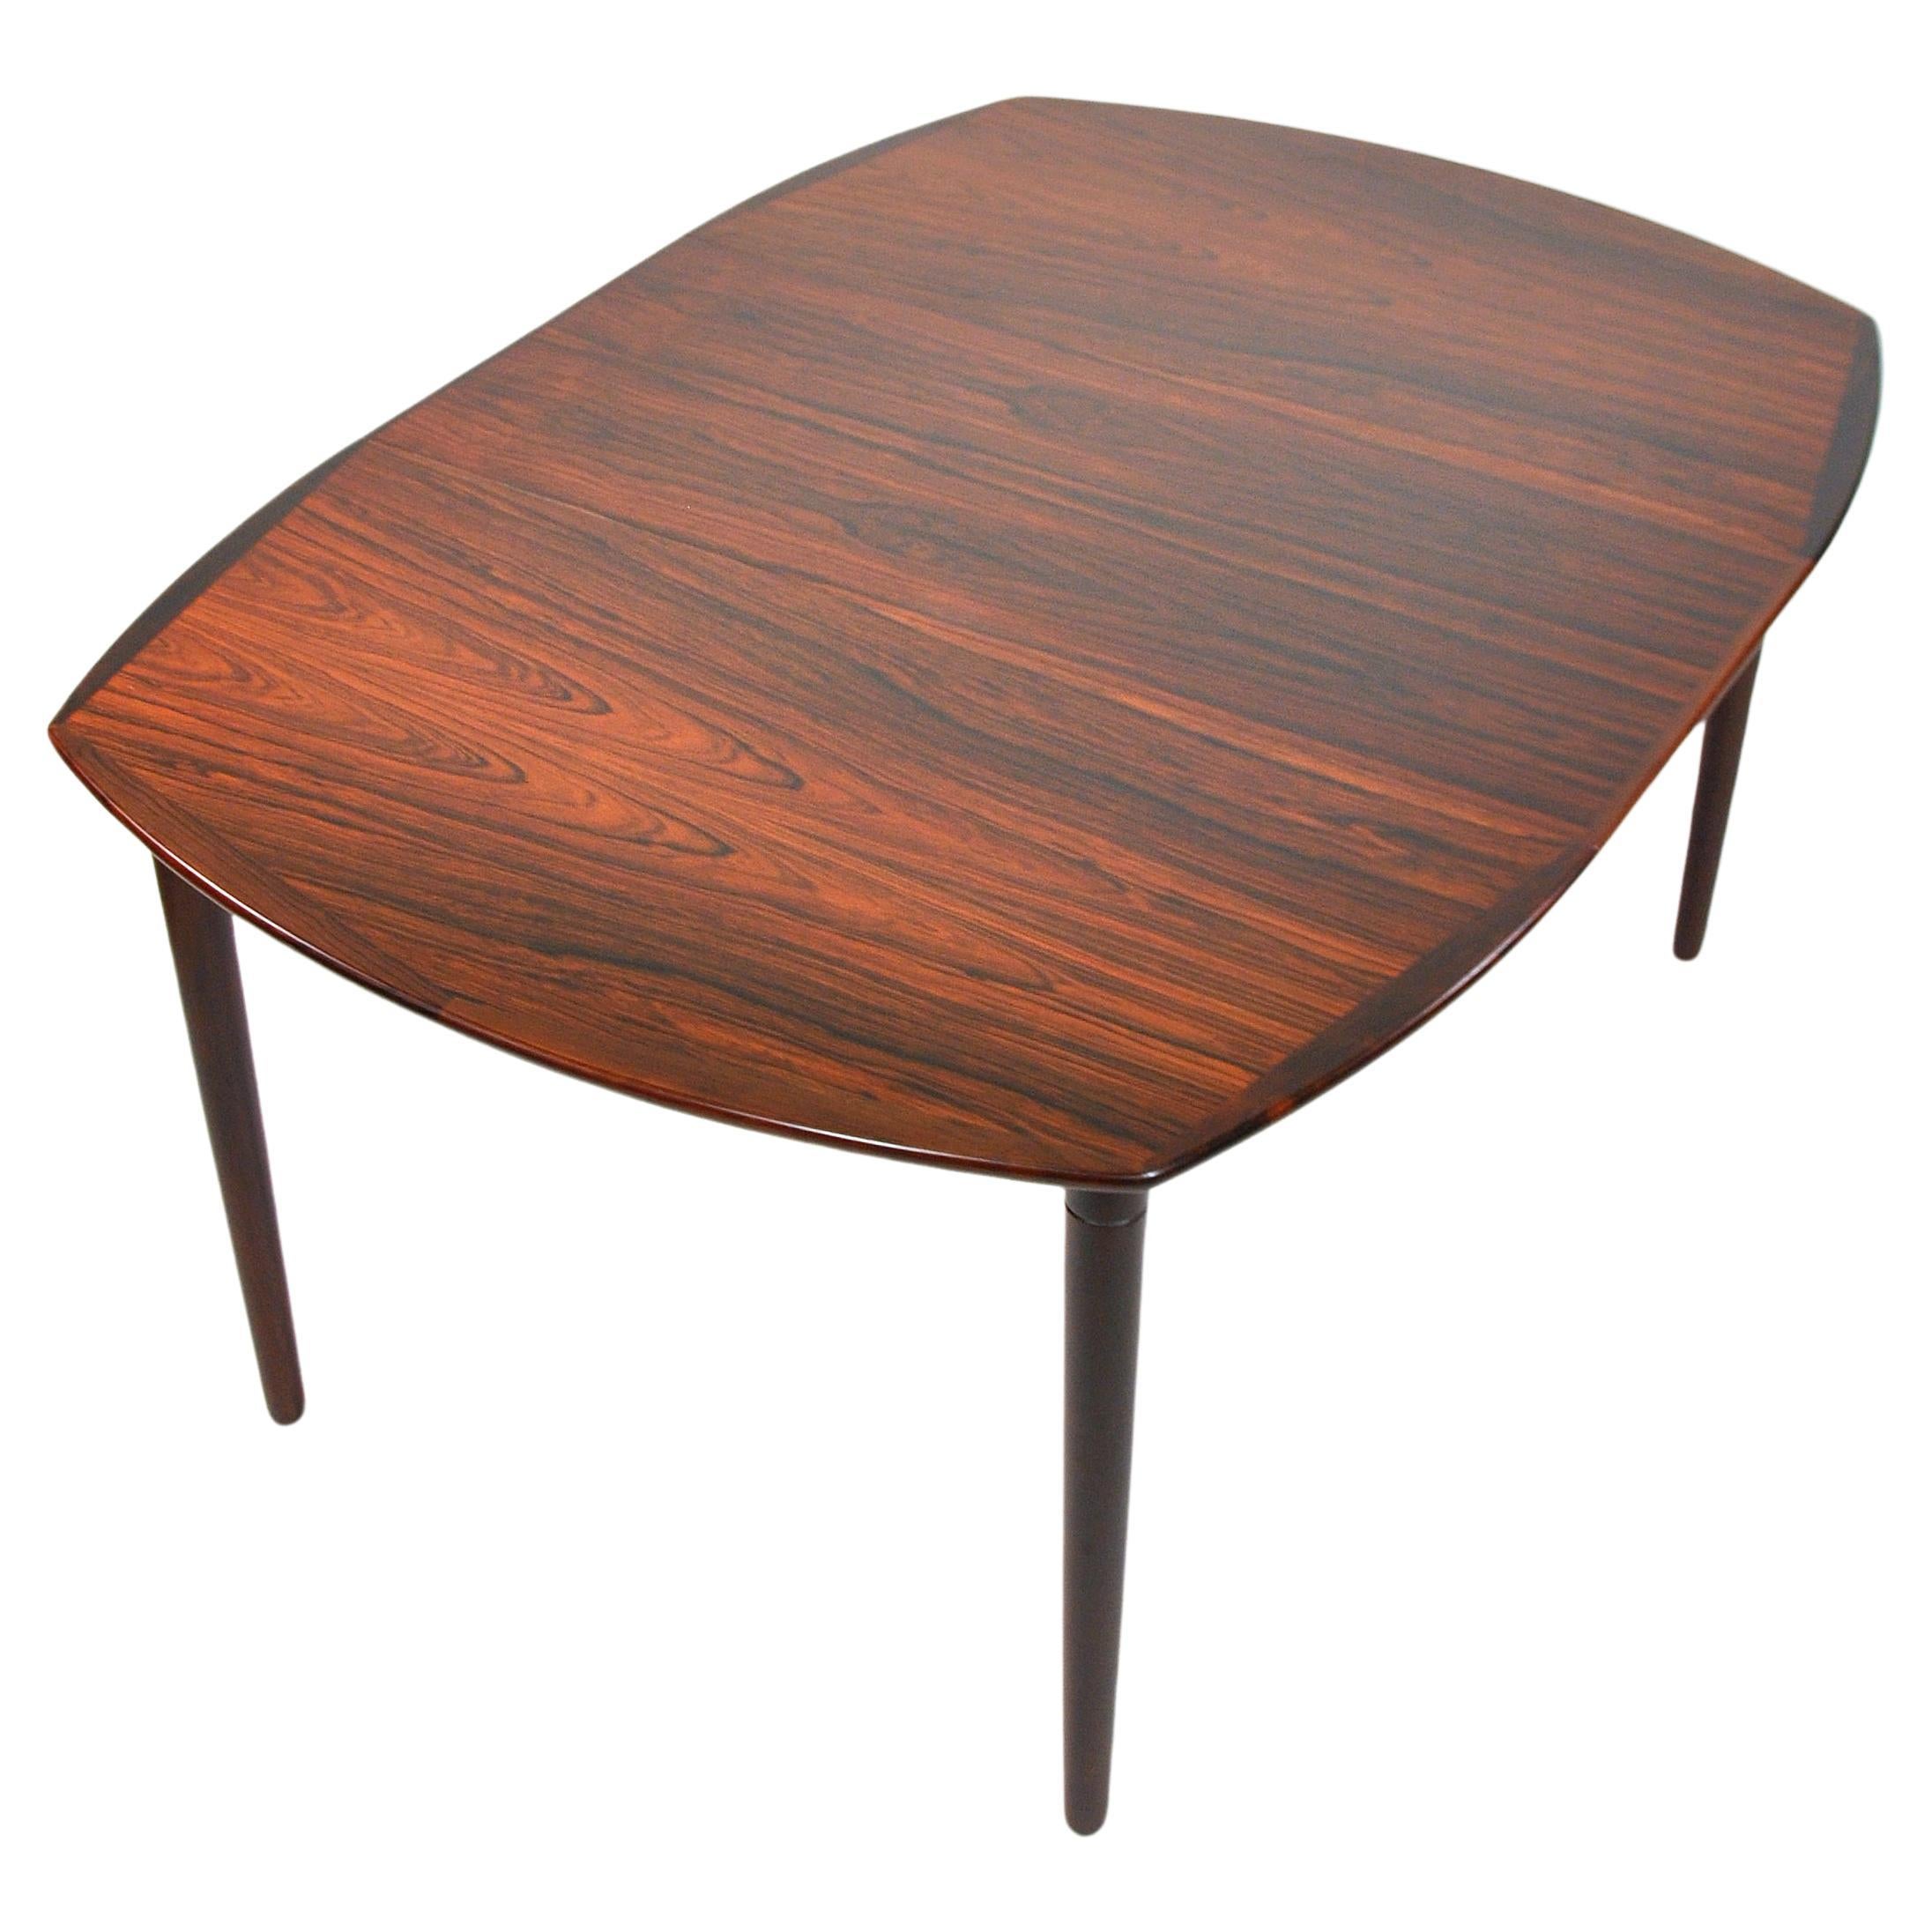 Mid-Century Modern Vintage Danish Rosewood Oval Extension Dining Table by Rastad Relling